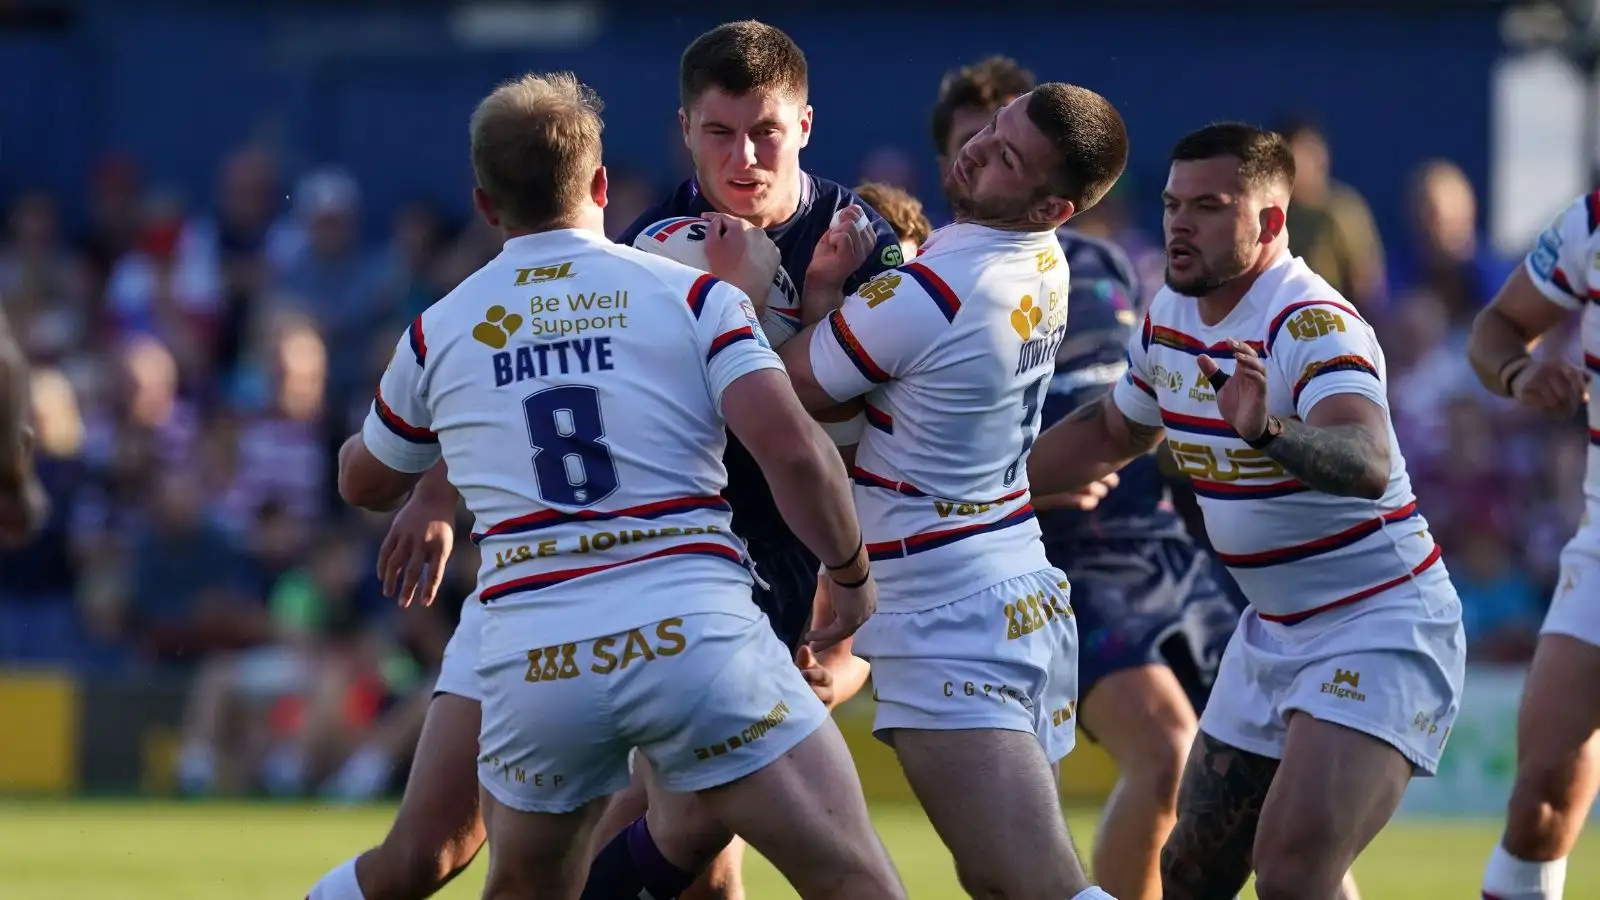 Wigan Warriors prop Ethan Havard in action against Wakefield. Photo by PA Images / Alamy Stock Photo.